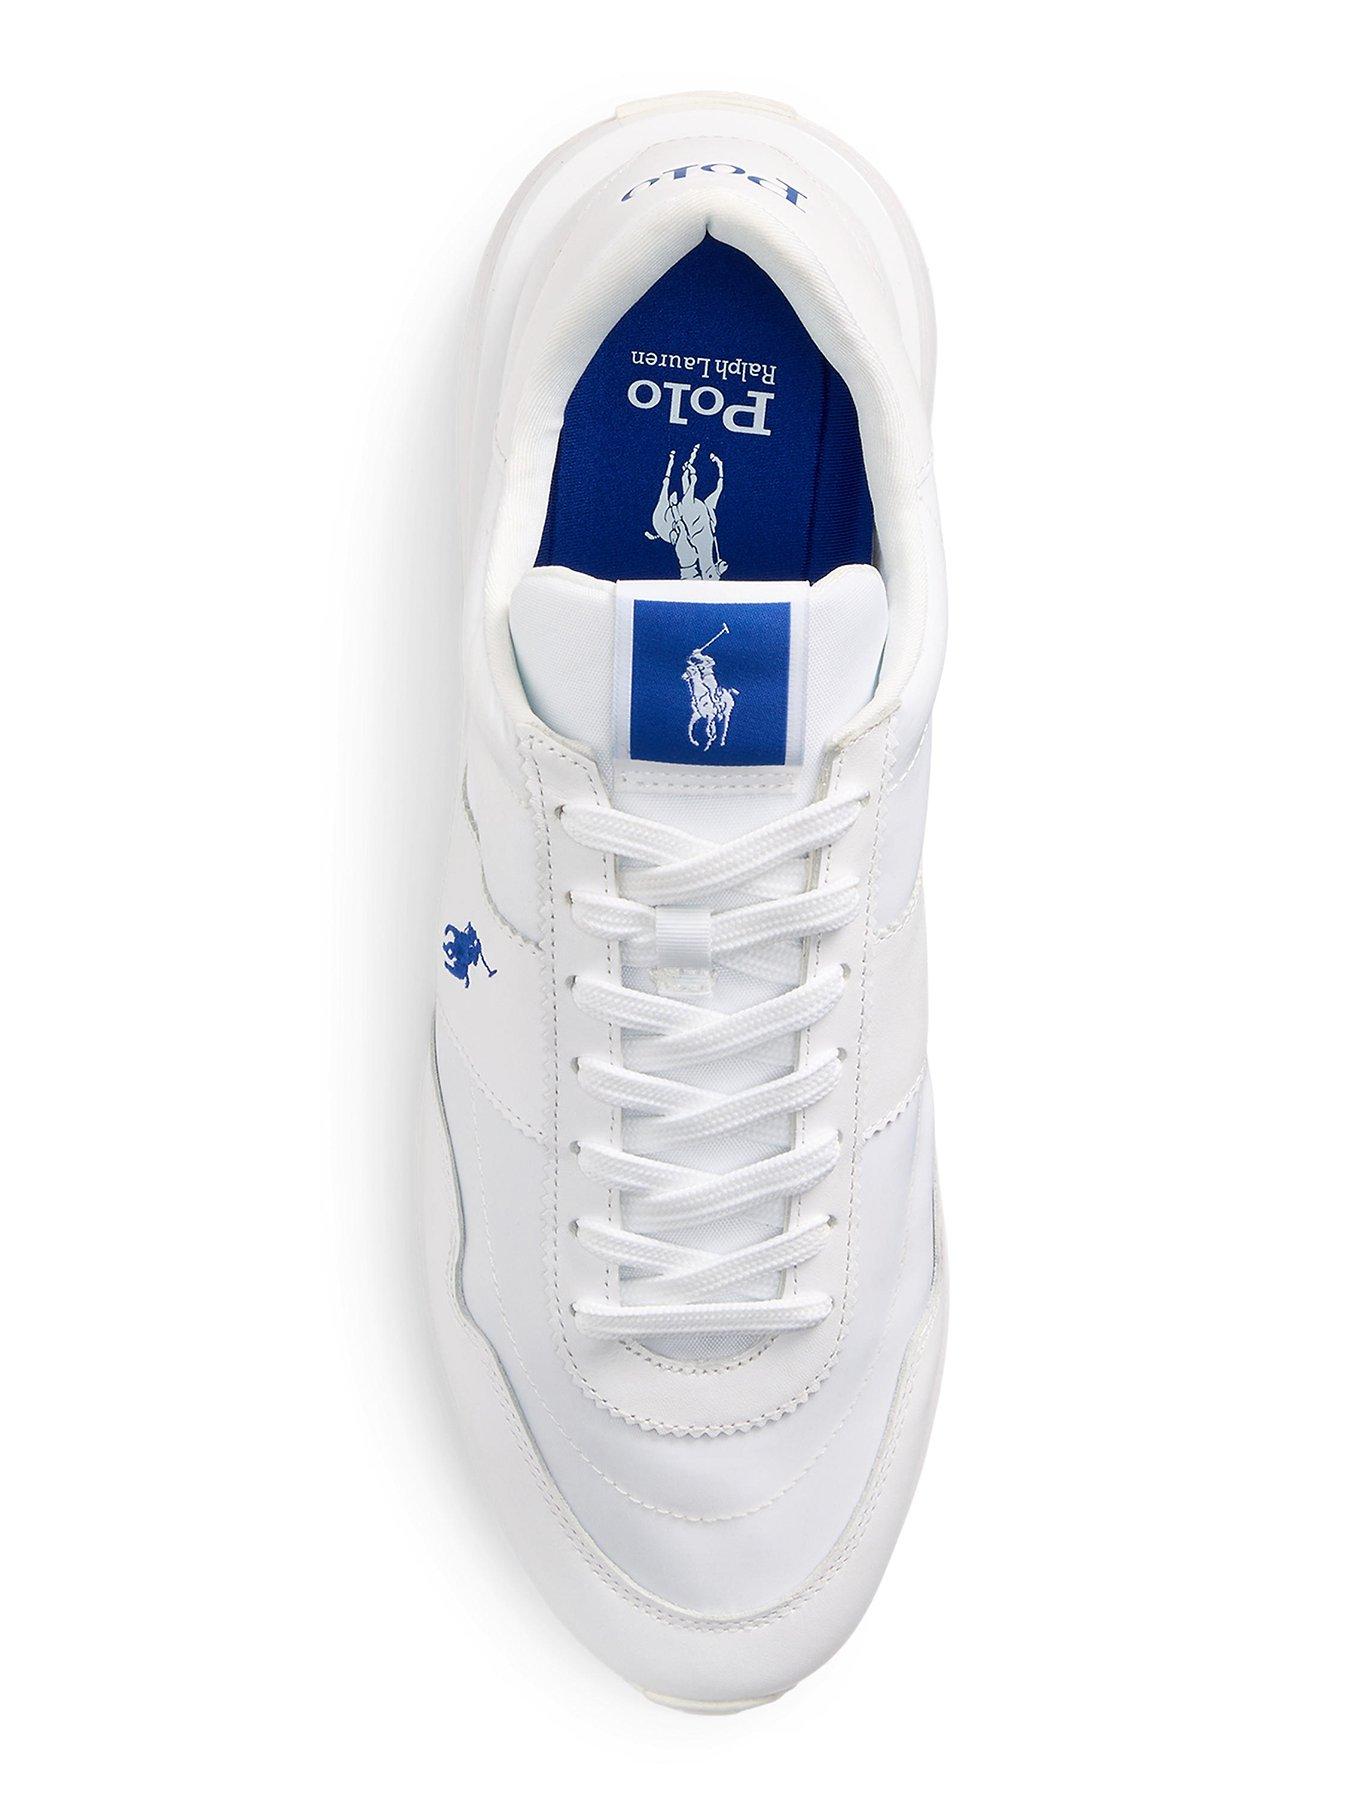 Polo Ralph Lauren Train 89 Pp Trainers - White | Very.co.uk